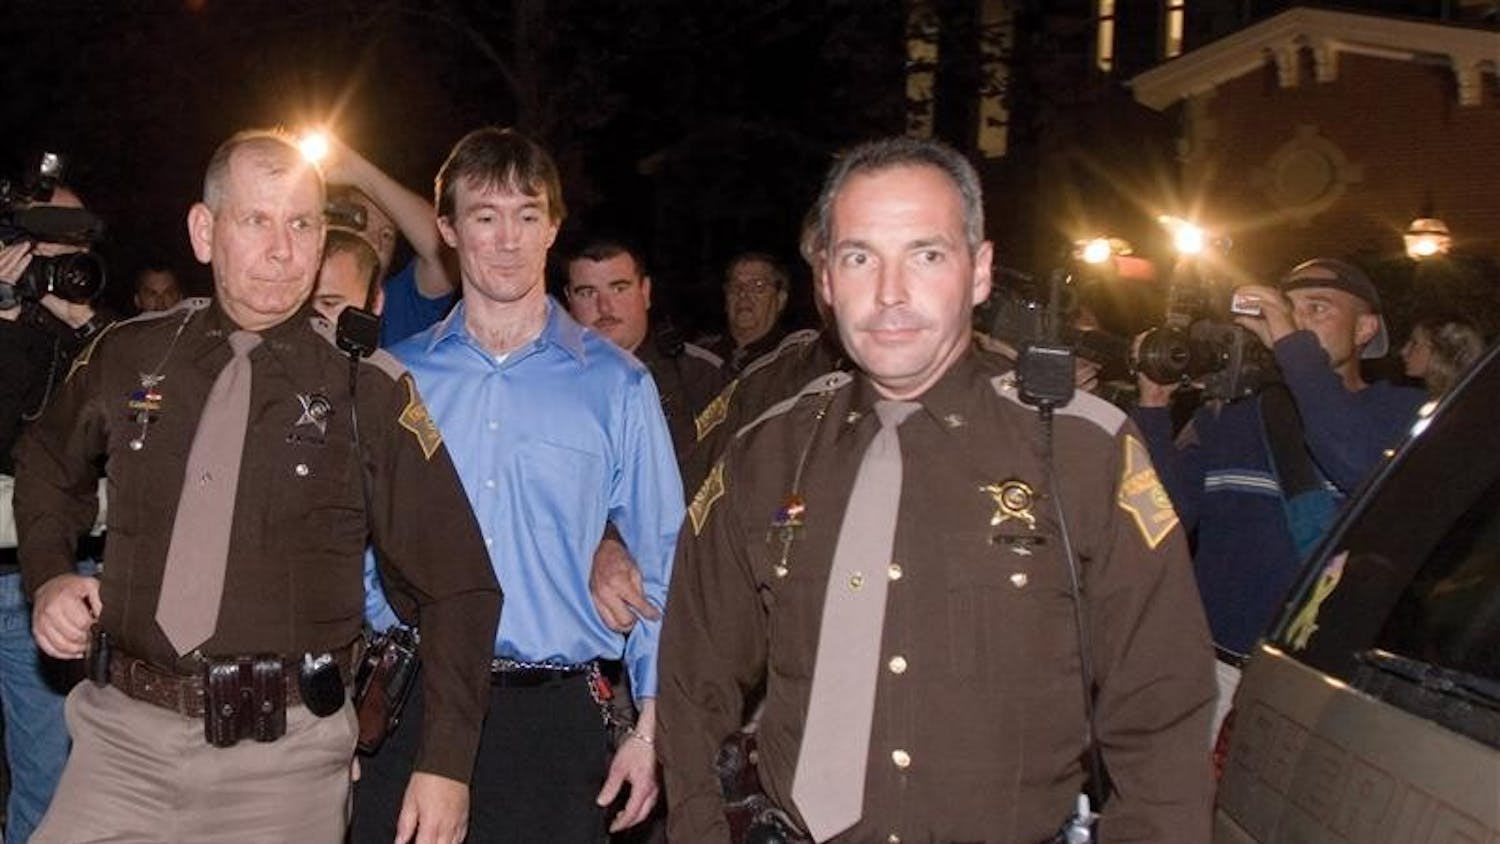 John R. Myers II is led out of the courthouse on Oct. 30, 2006 evening after being found guilty after a 50-minute deliberation by the jury. He will be sentenced by Superior Judge Christopher Burnham in the next 30 days.